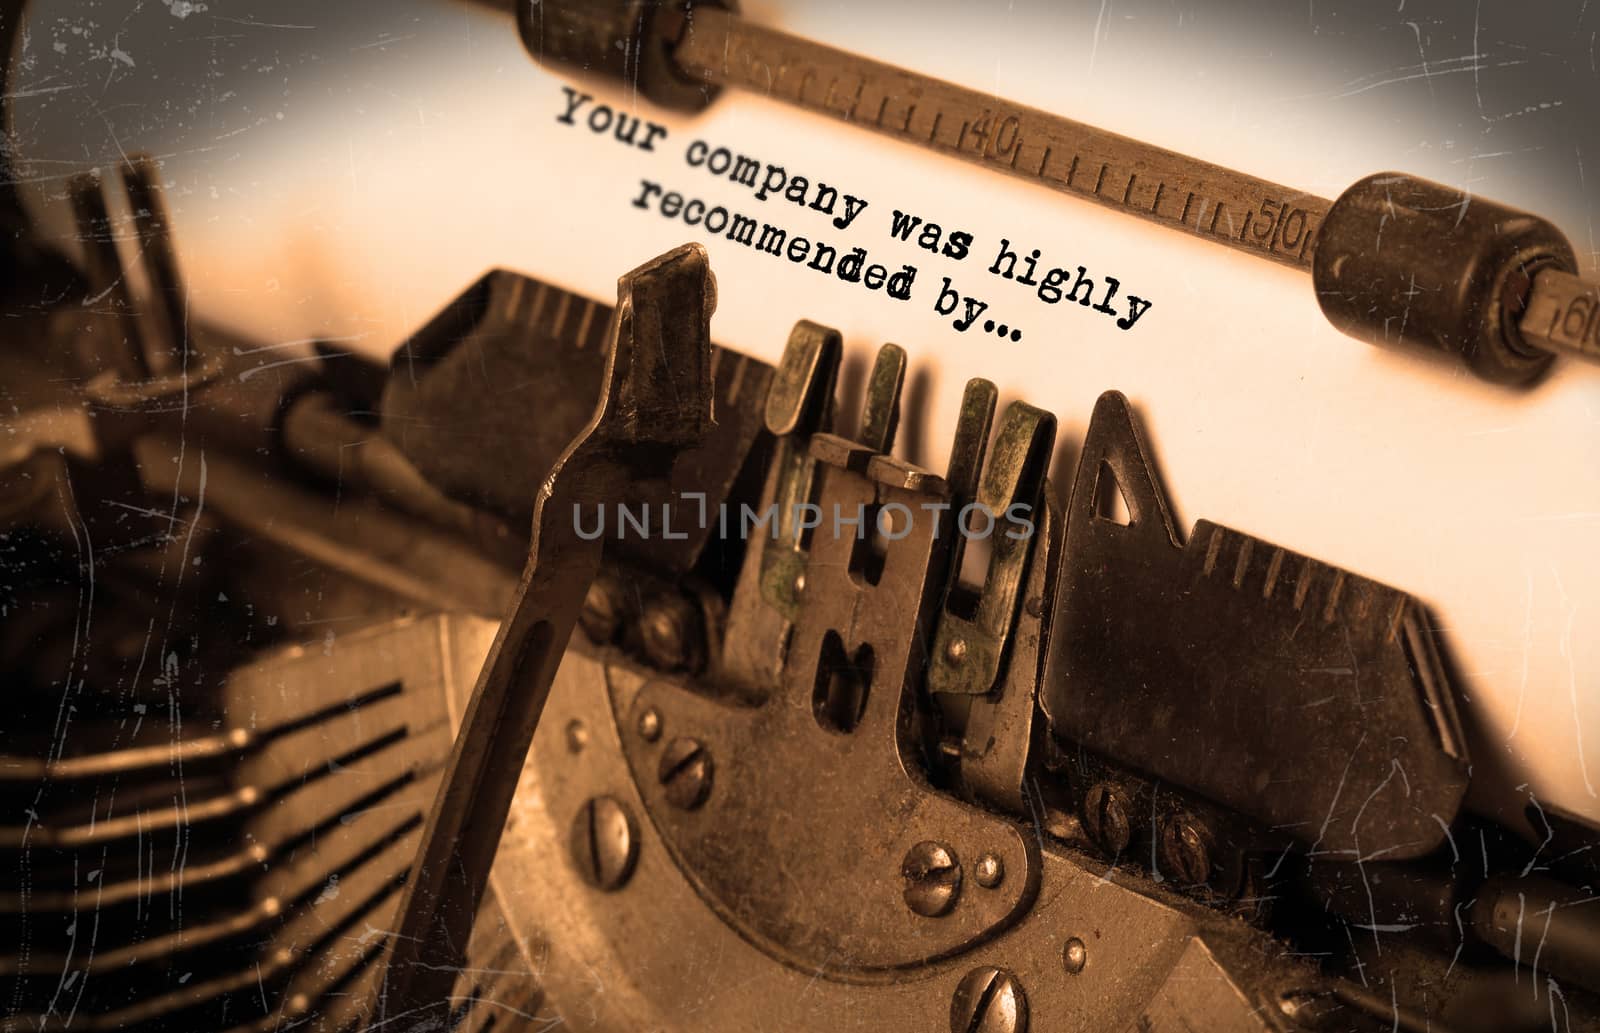 Close-up of an old typewriter with paper, selective focus, your company was highly recommended by